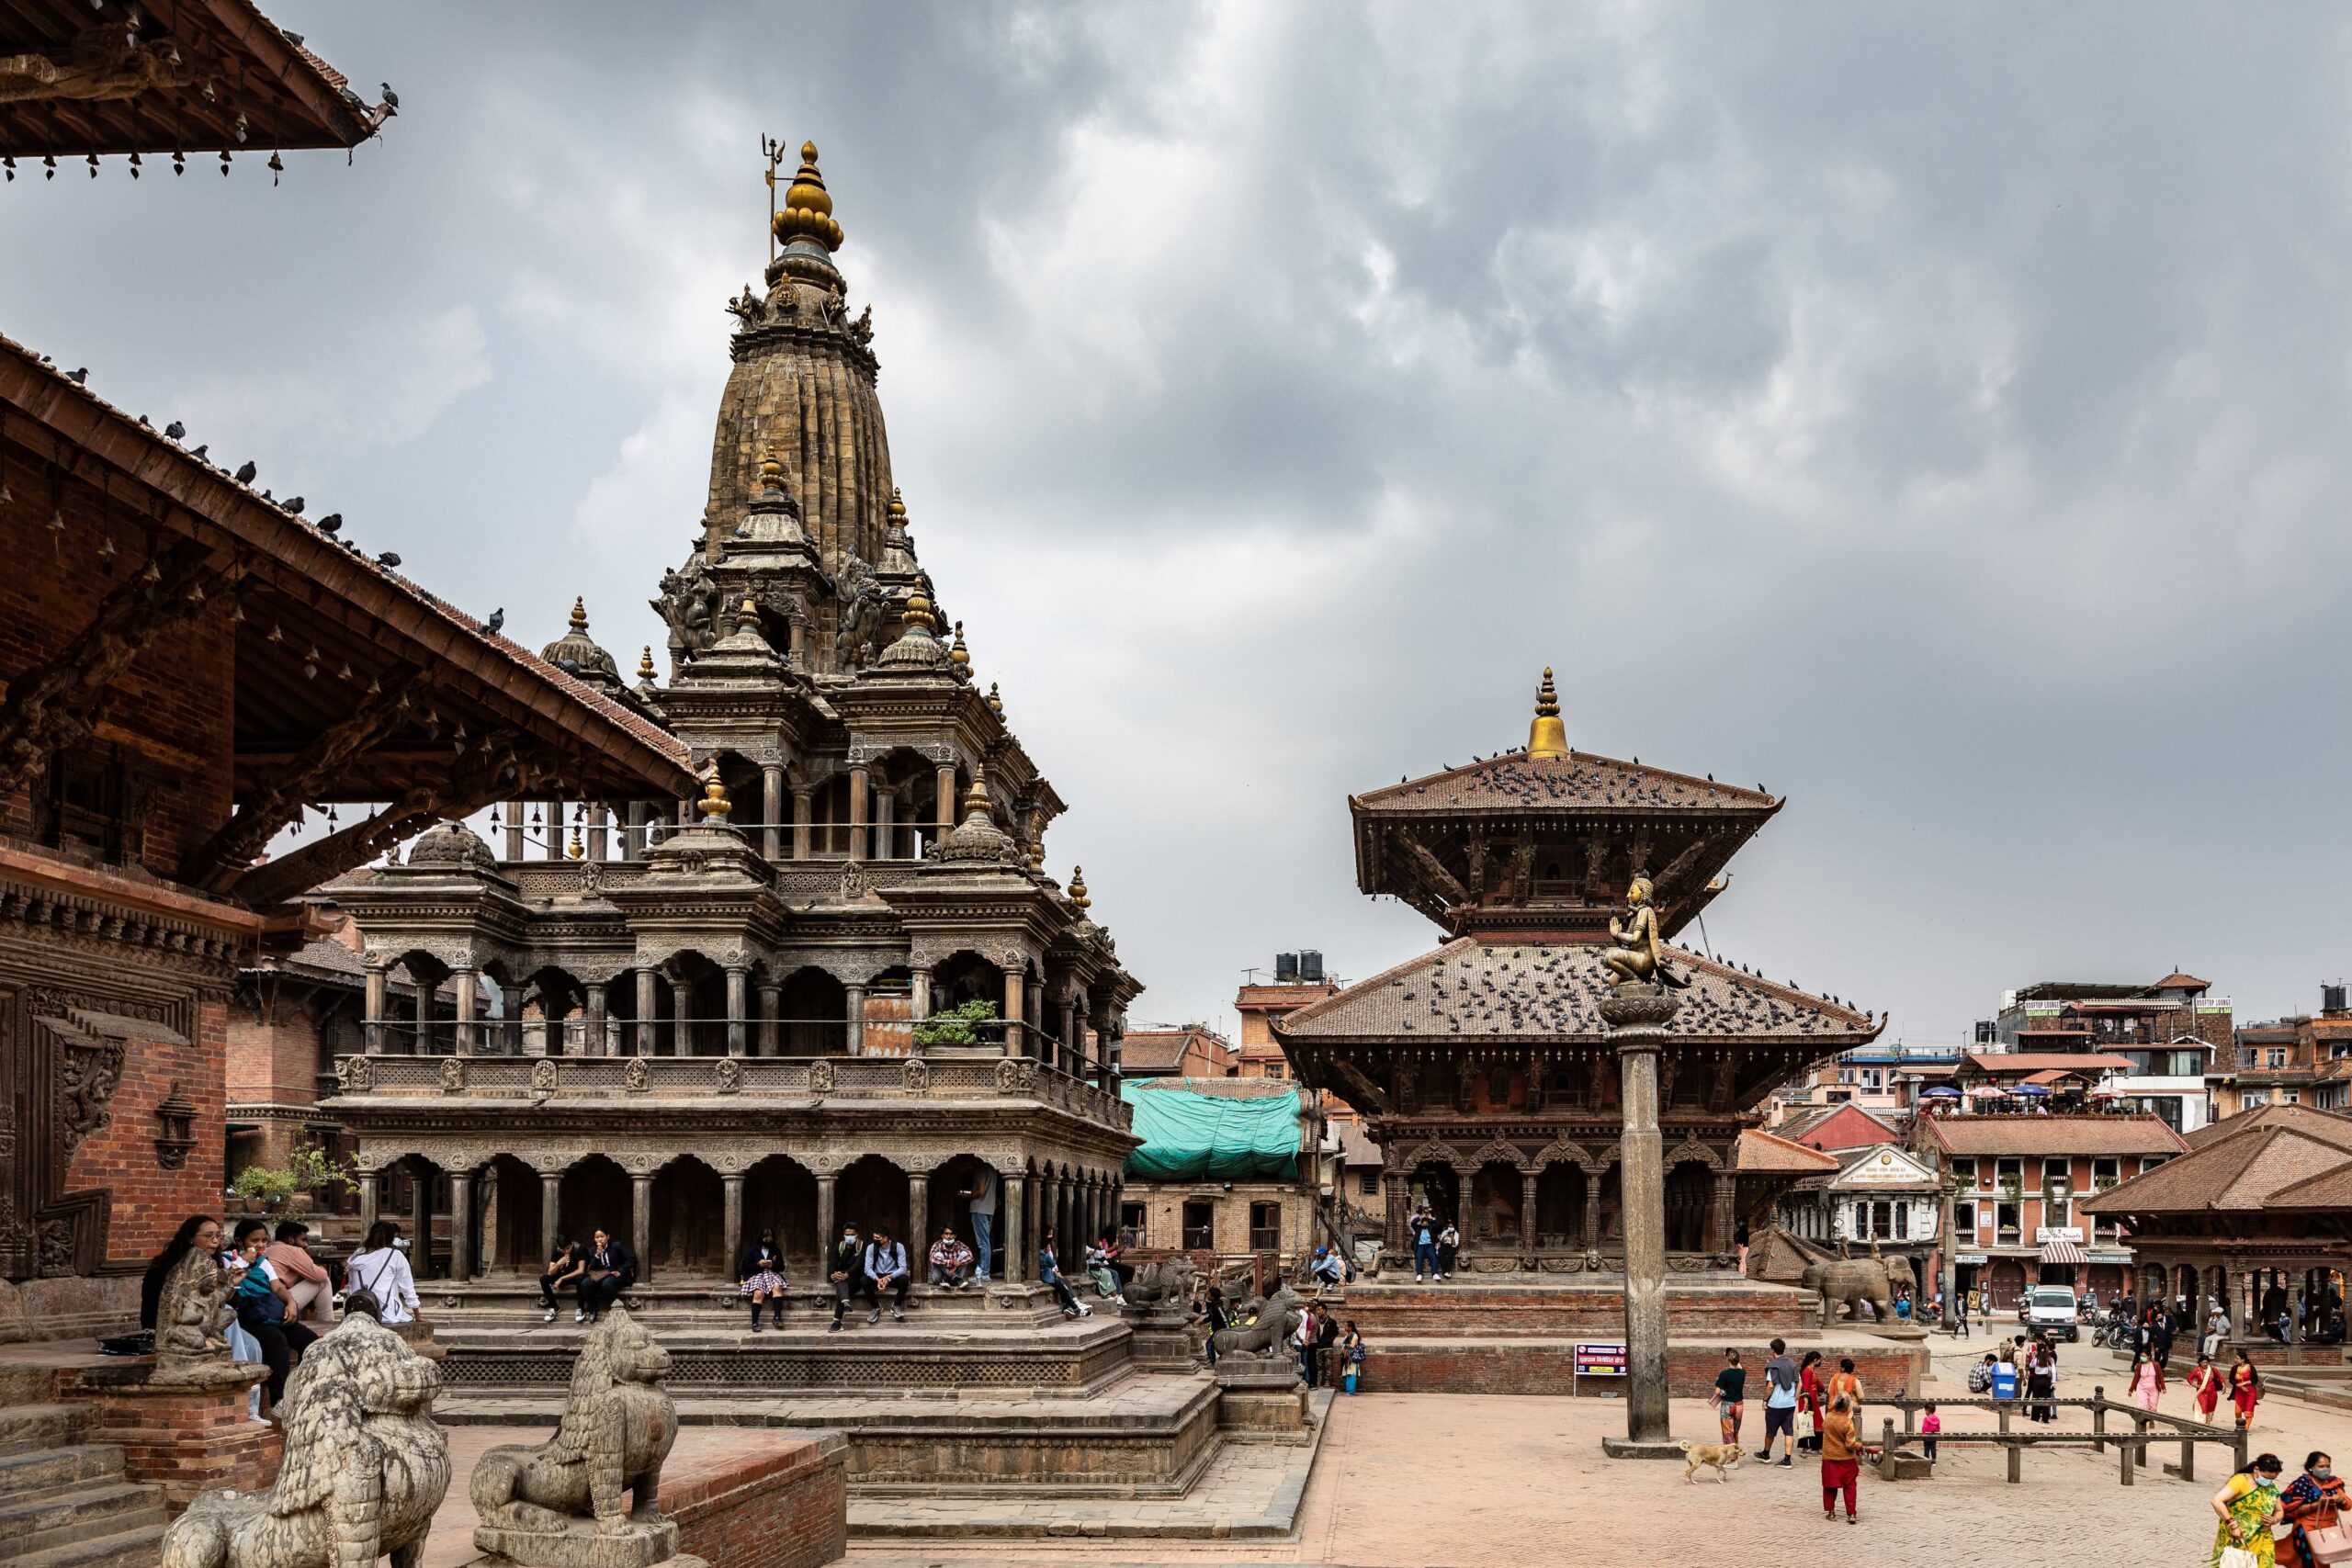 Luxury Nepal and Tibet tour : From the Jungle to the Roof of the World